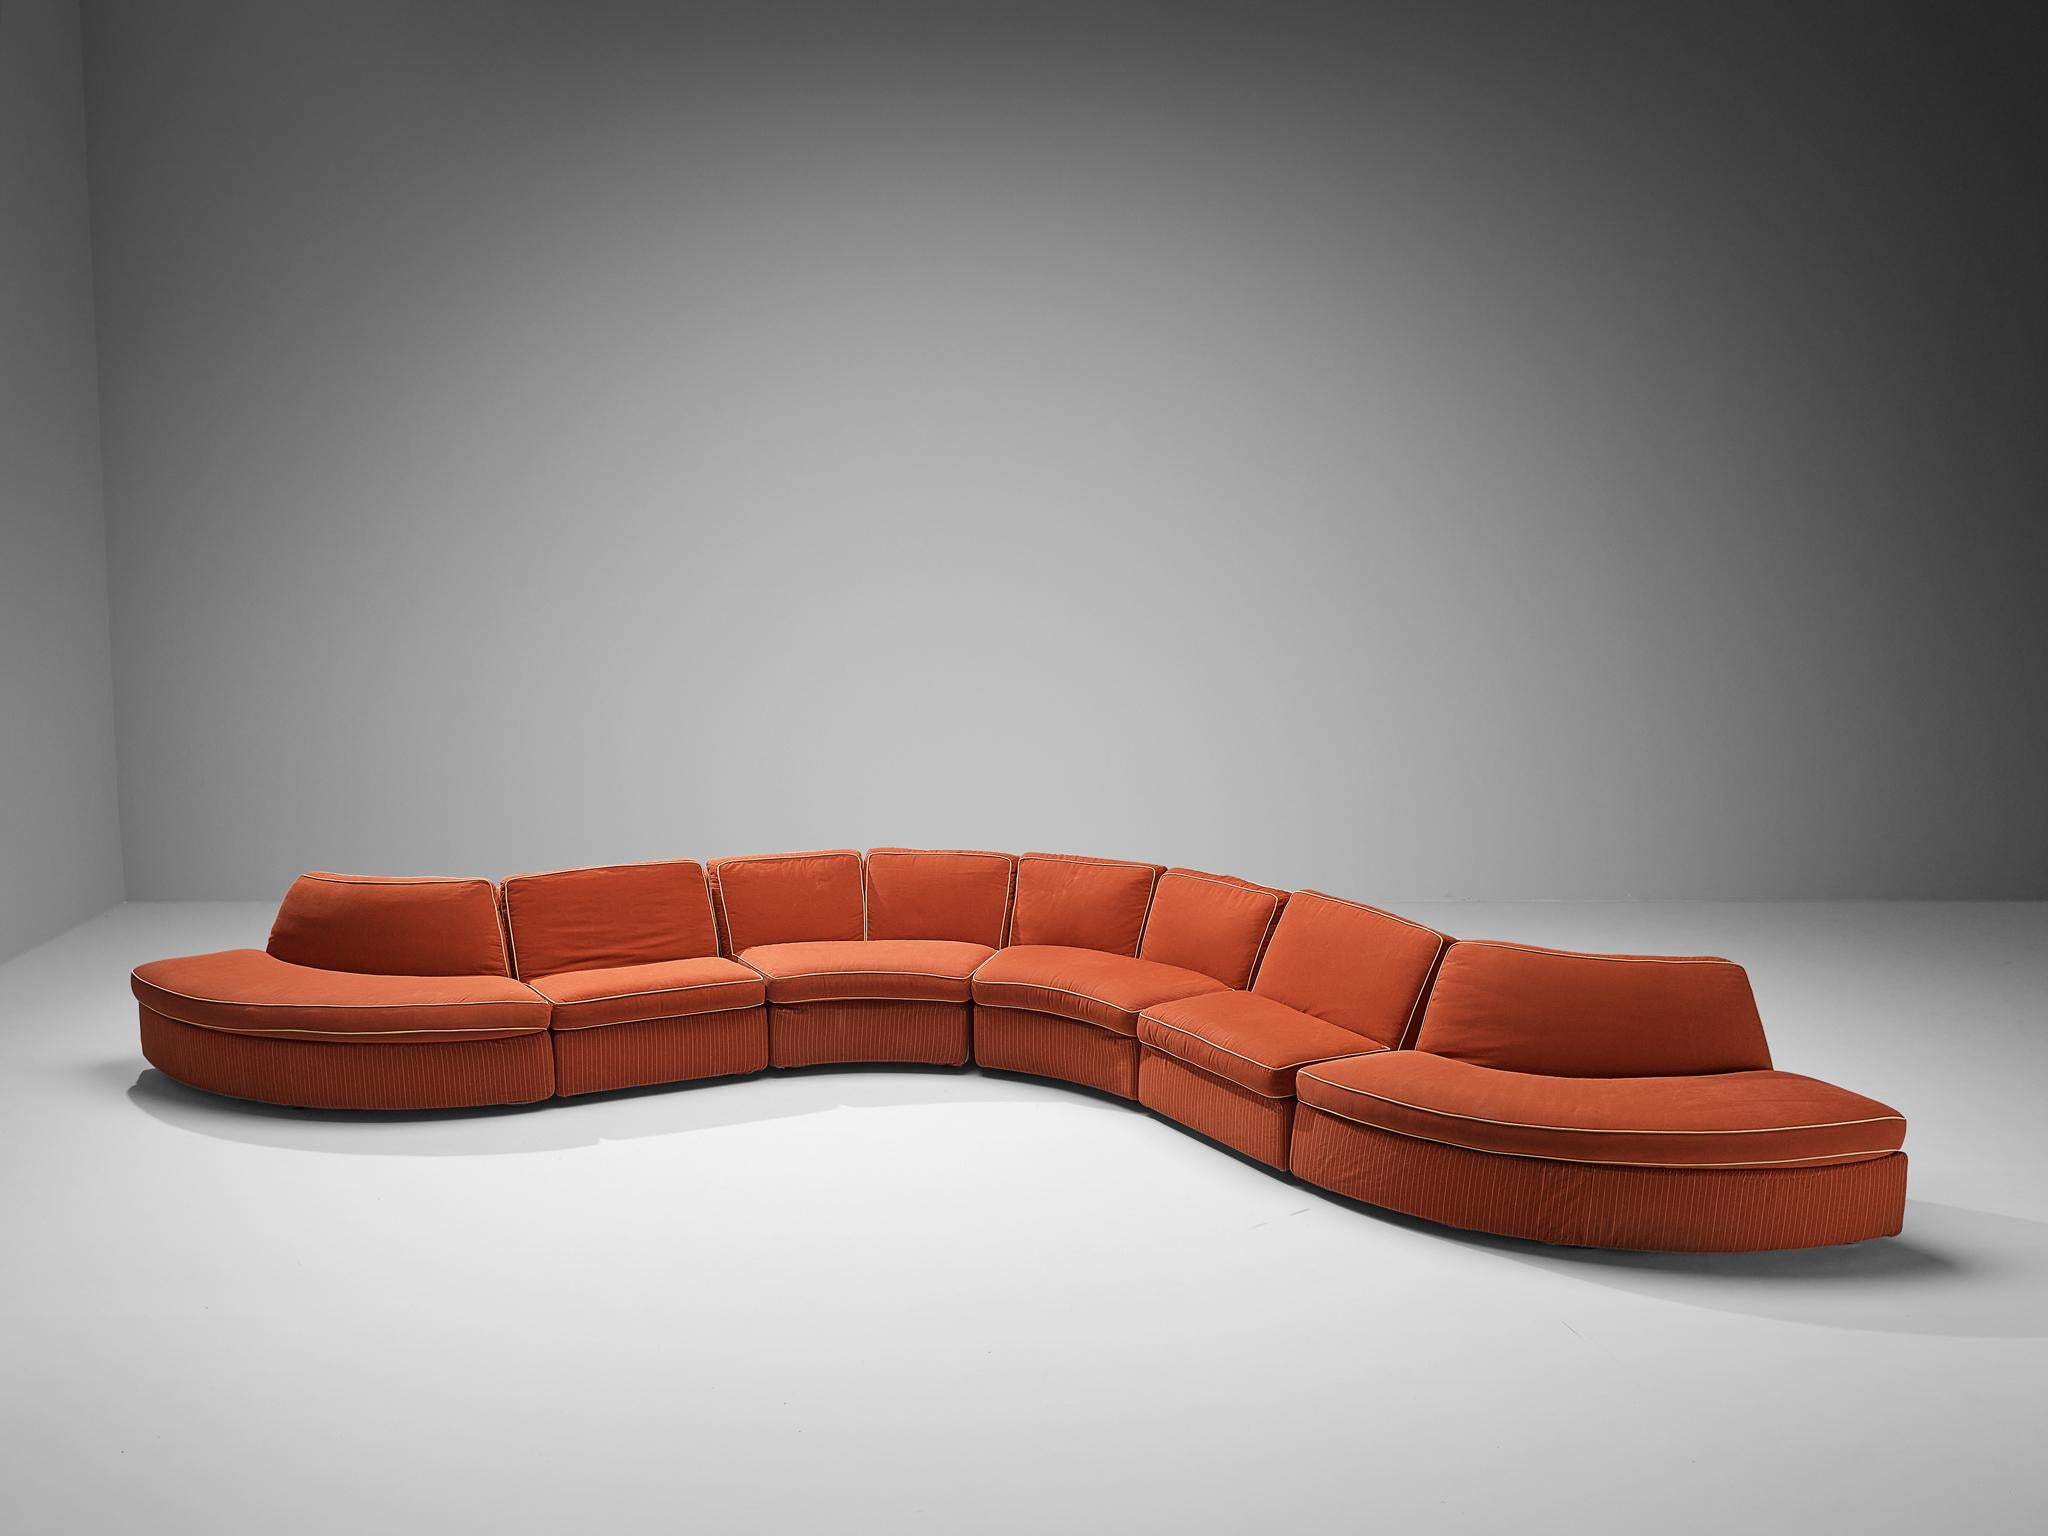 Rossi di Albizzate, modular sofa, fabric, plastic, Italy, 1970s

A rare and postmodern design produced by Rossi di Albizzate. Design in the seventies was all about going beyond the strict conventions of modernism, with the exploration of the